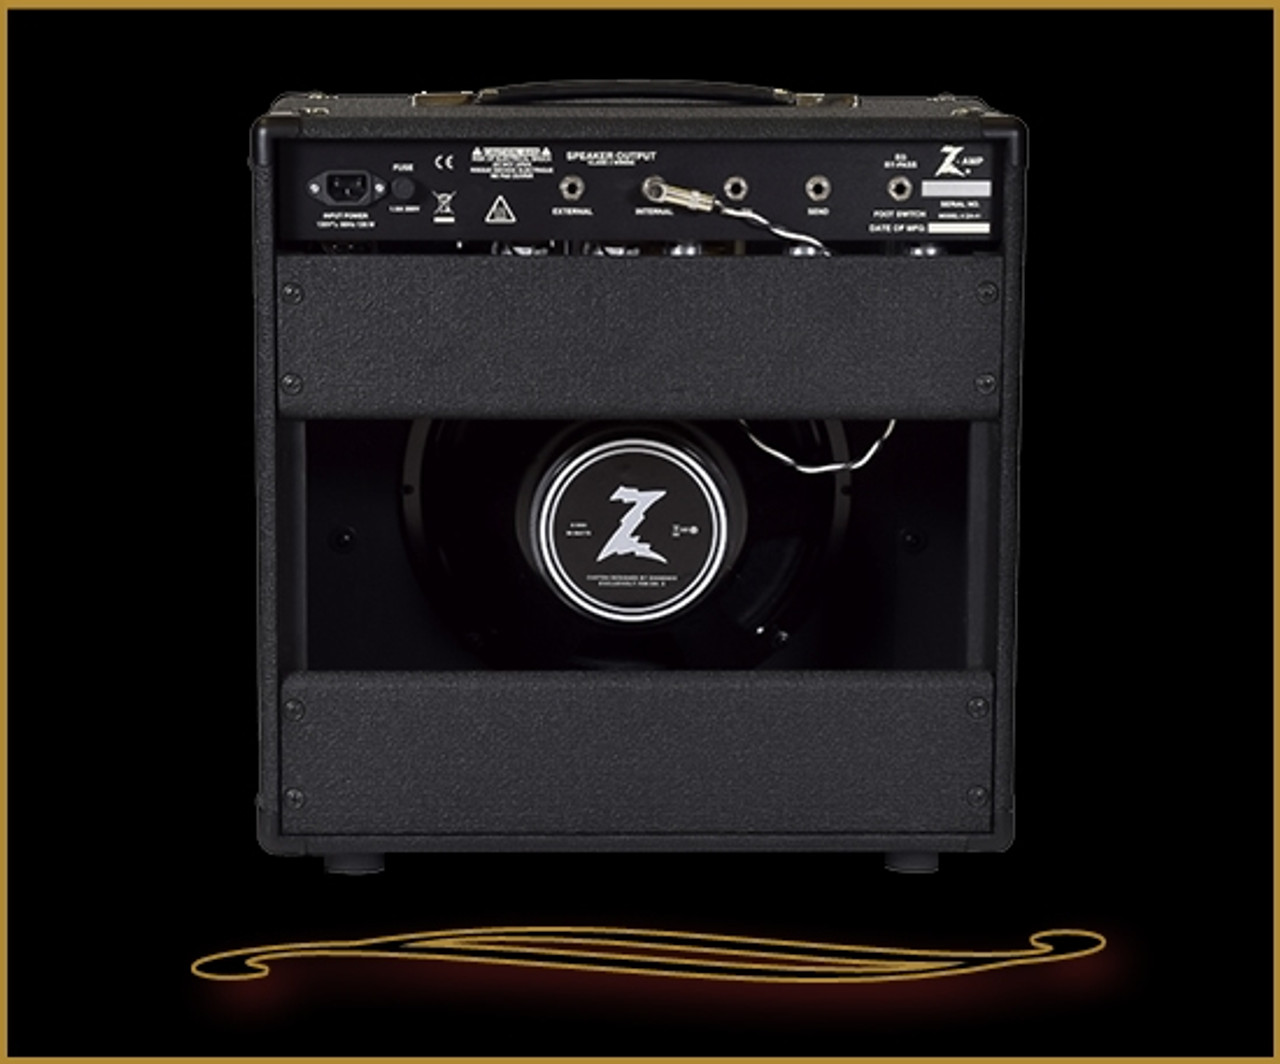 Dr. Z Cure 1x12 Combo in Black with ZWreck Grille